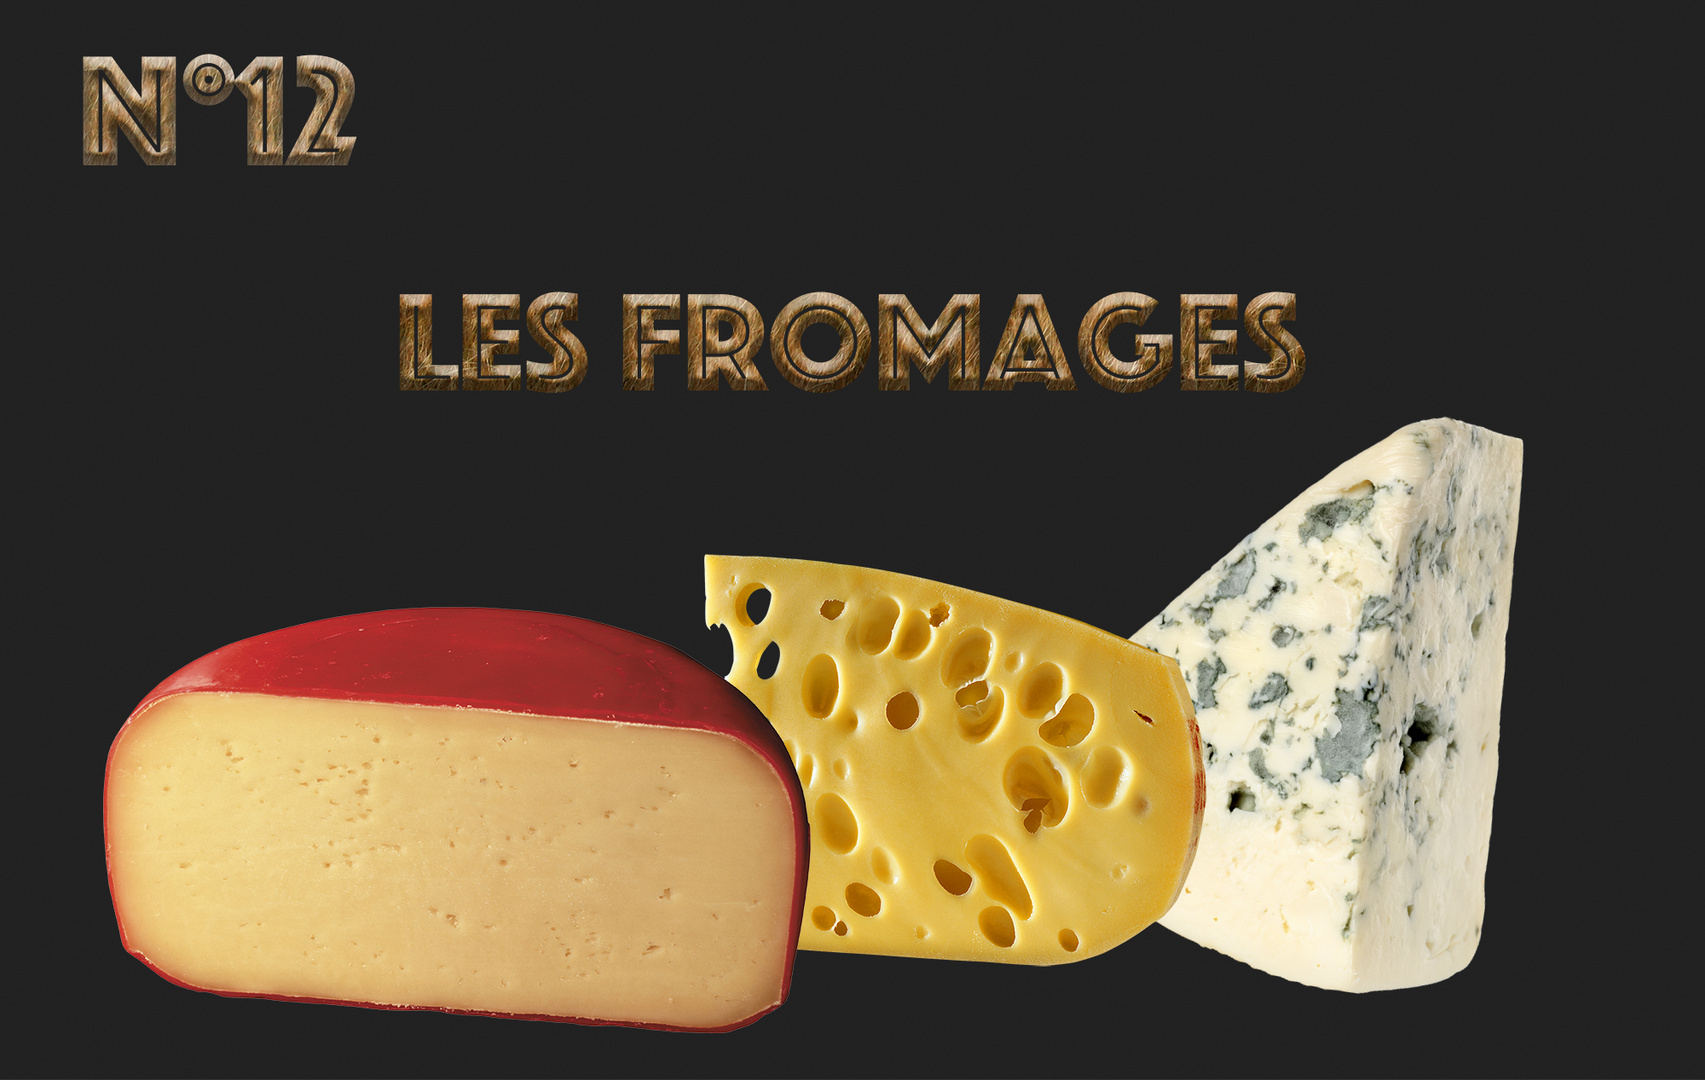  Les fromages